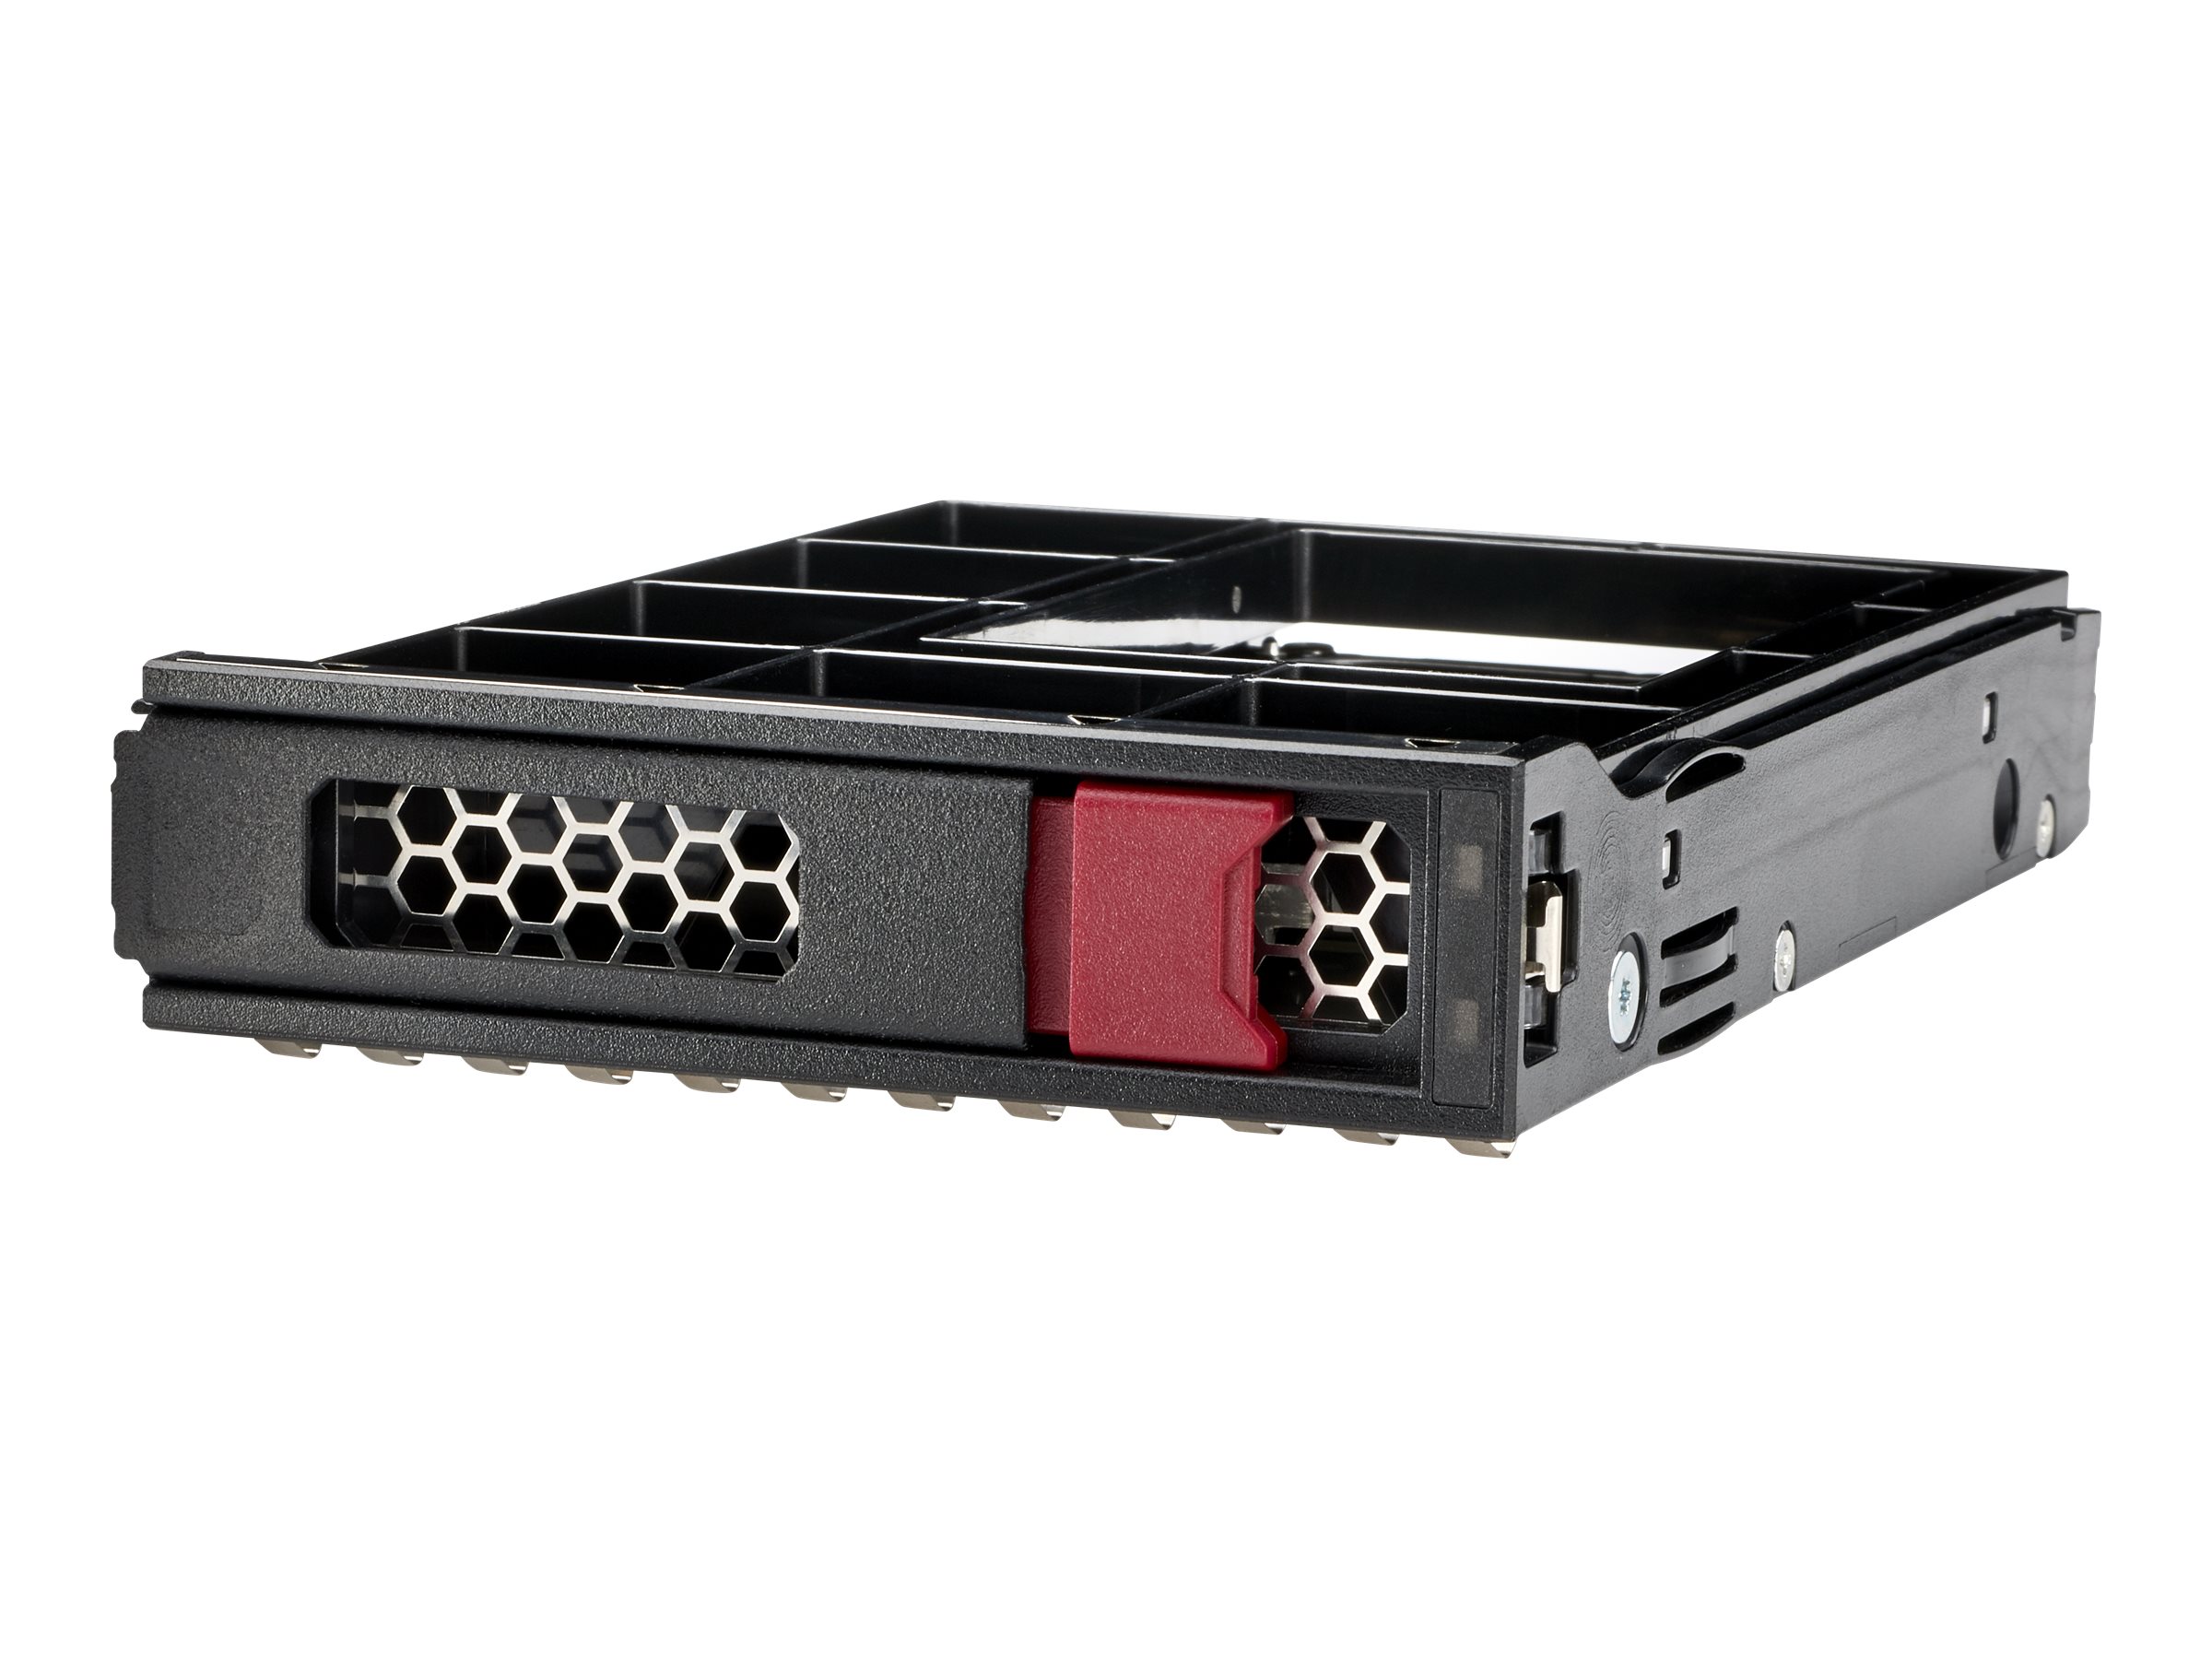 HPE Mixed Use Value - SSD - 960 GB - Hot-Swap - 2.5